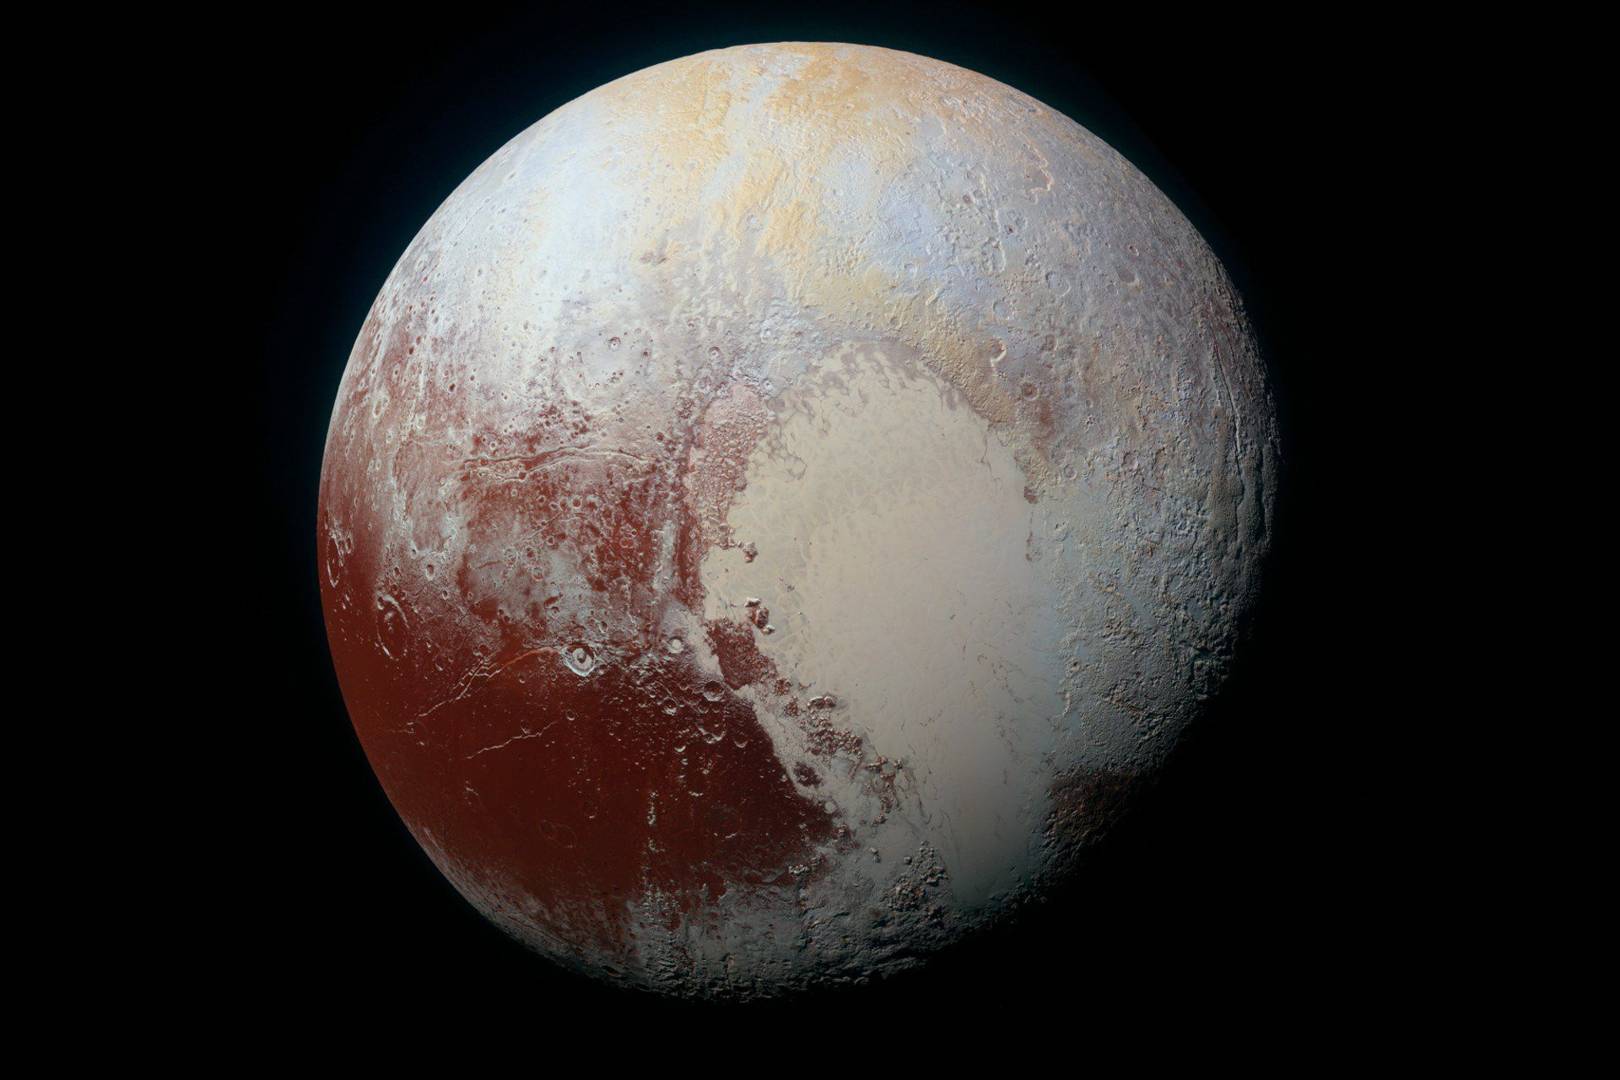 Nasa scientists want Pluto to be a planet again